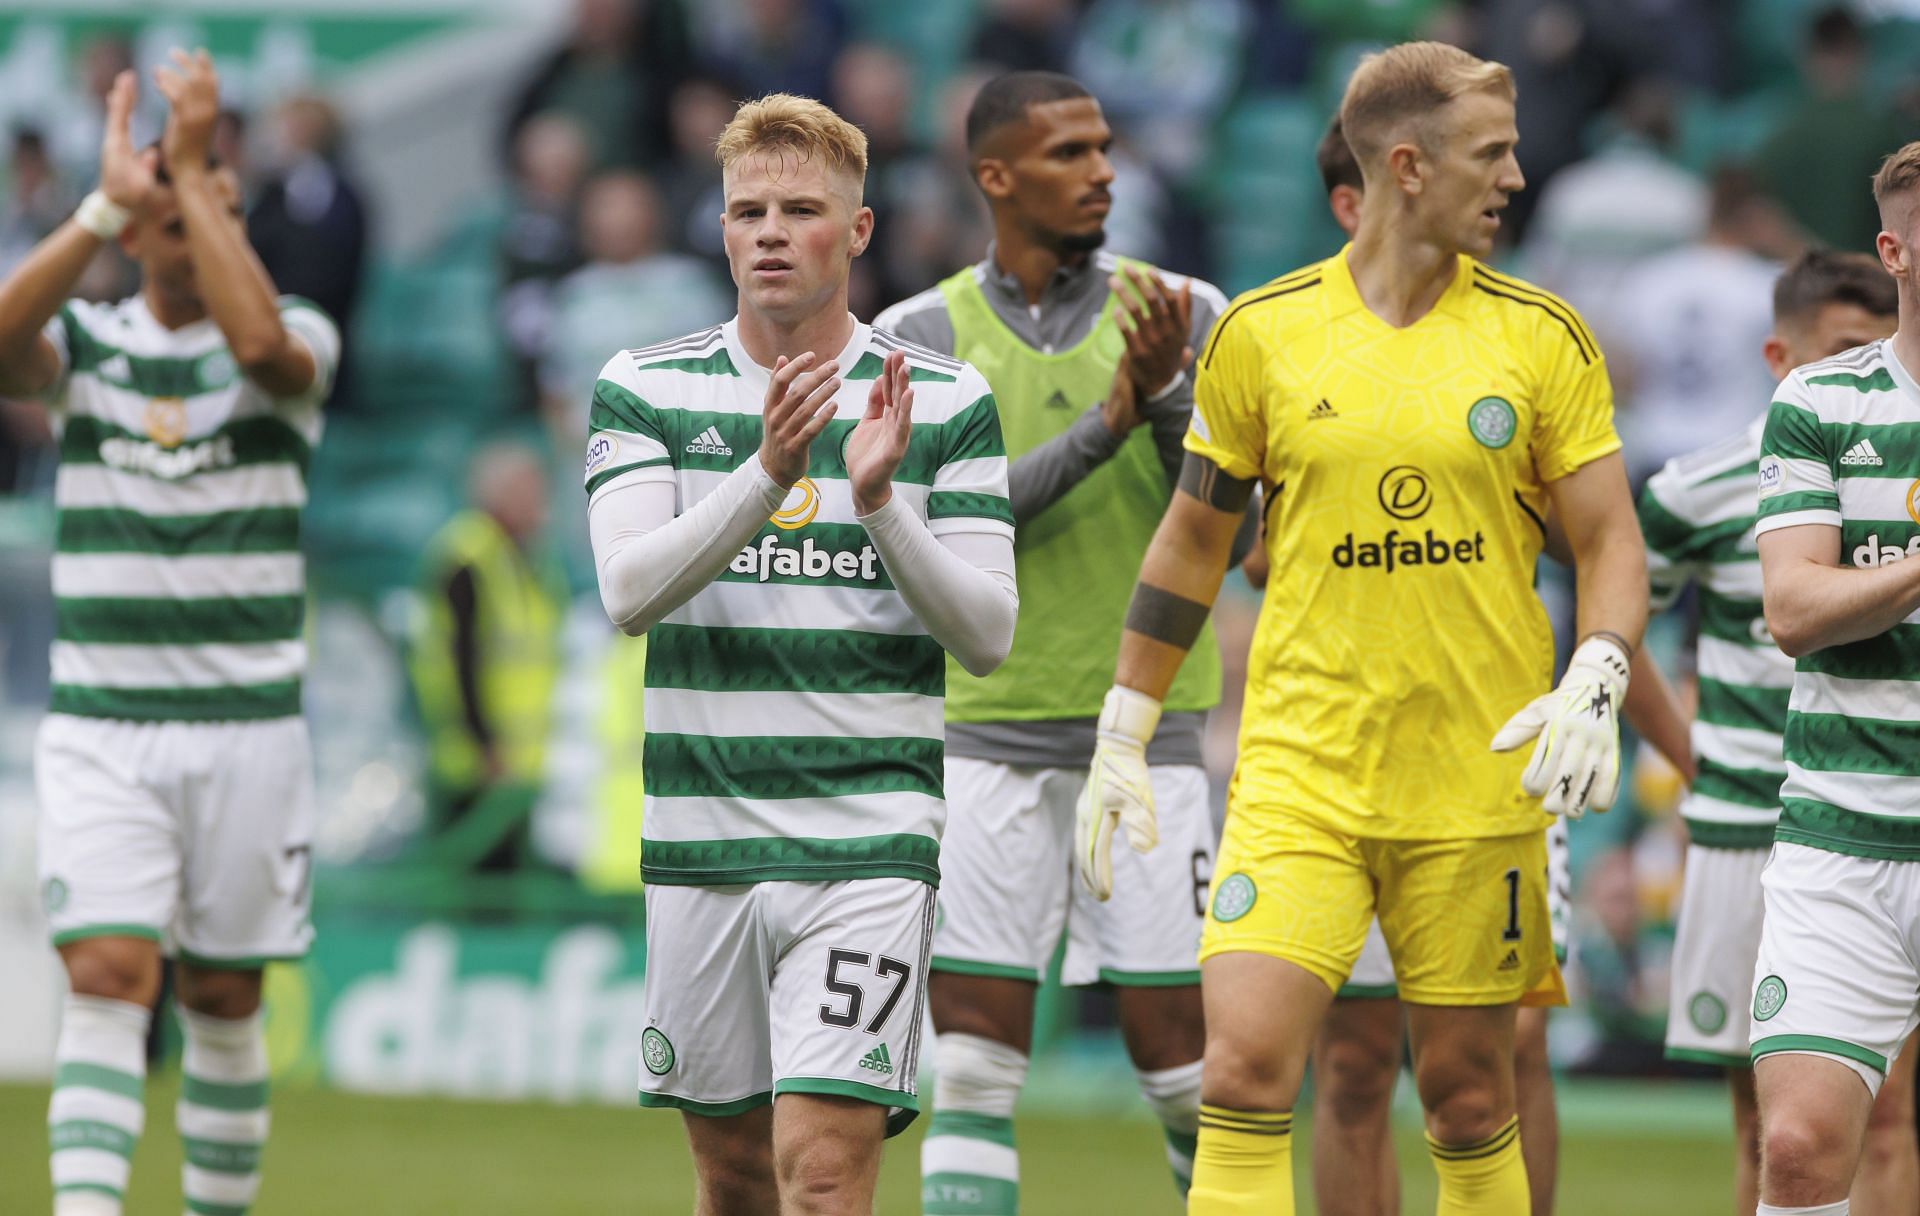 Celtic will face Kilmarnock in their upcoming Scottish Premiership fixture on Sunday